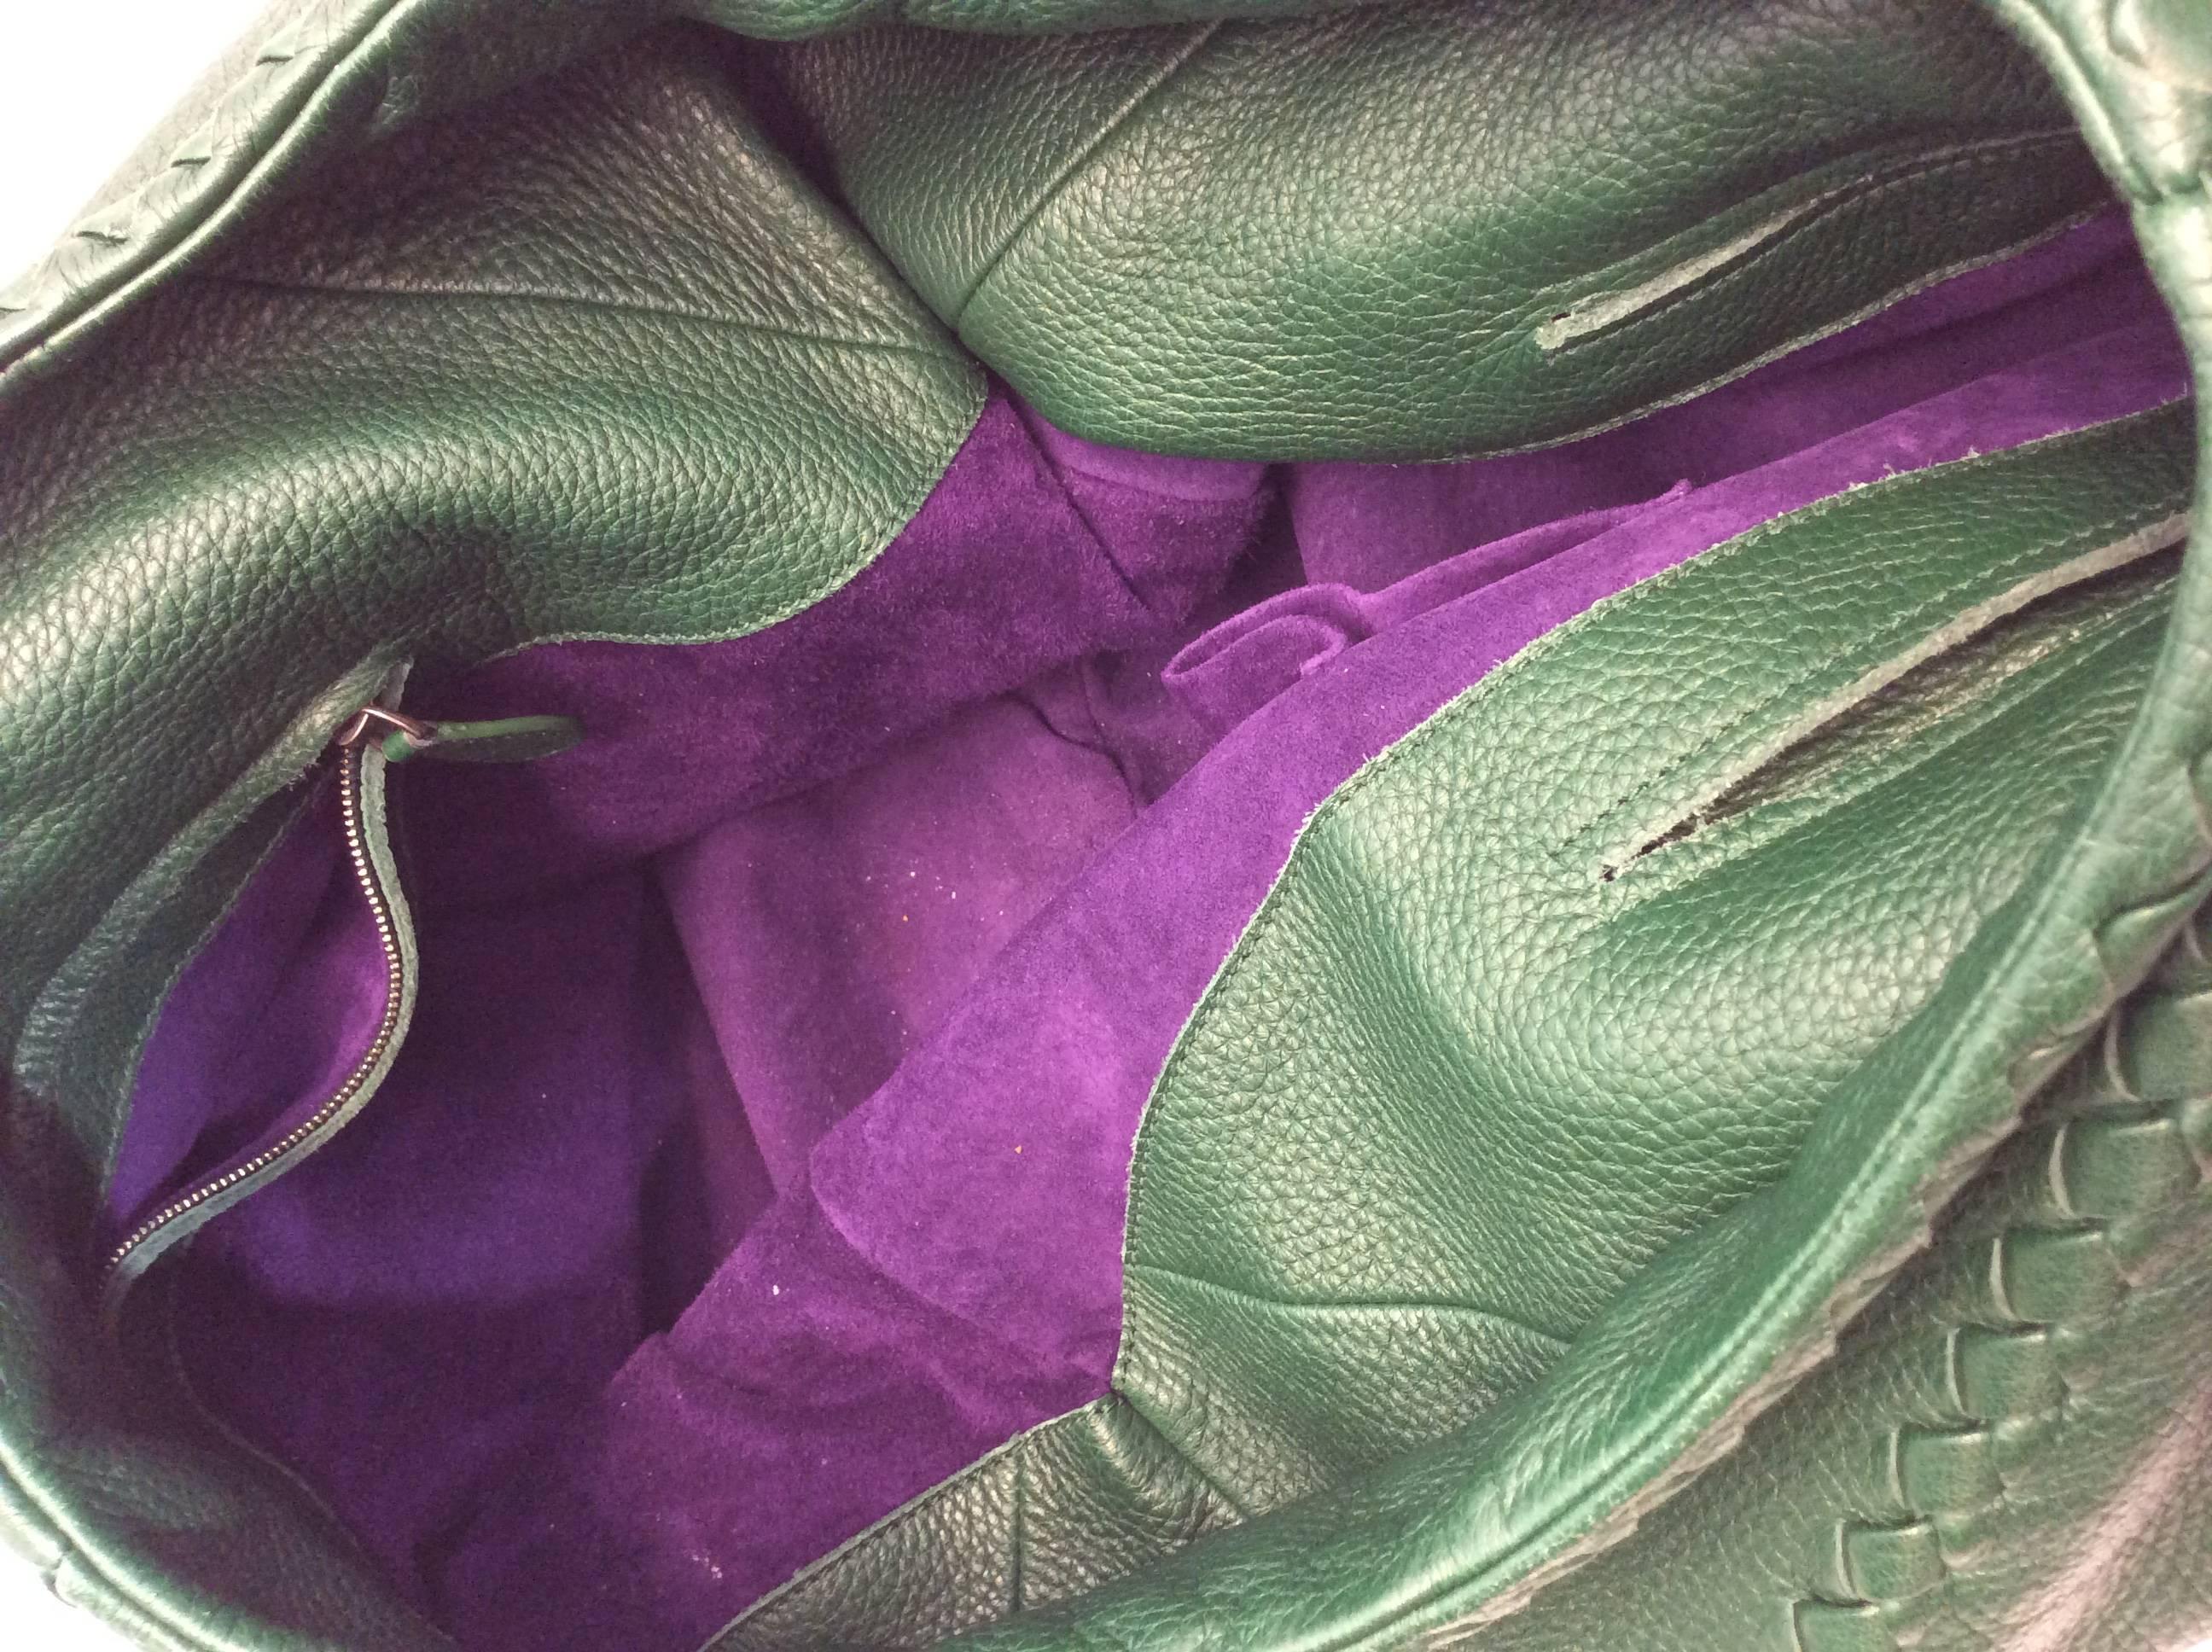 Bottega Veneta Green Leather Hobo Bag In Excellent Condition For Sale In Narberth, PA